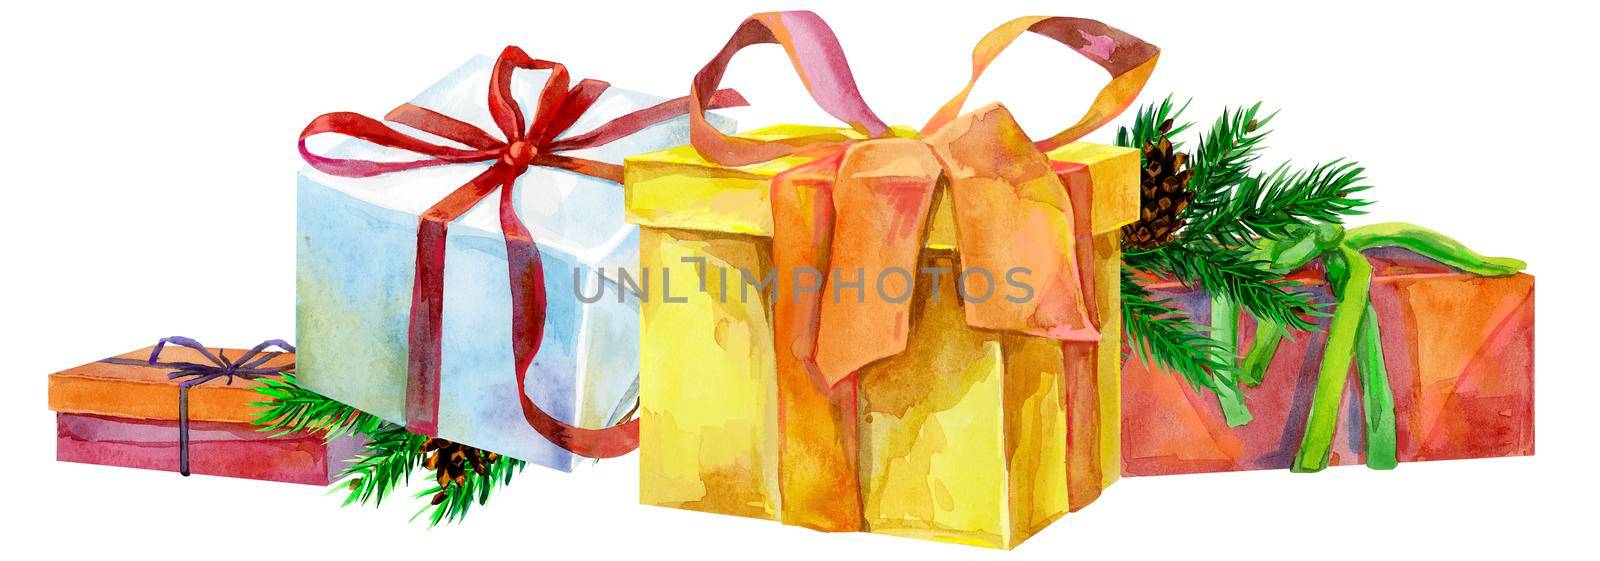 Watercolor Christmas Illustration with gift boxes. For design, print or background by NataOmsk